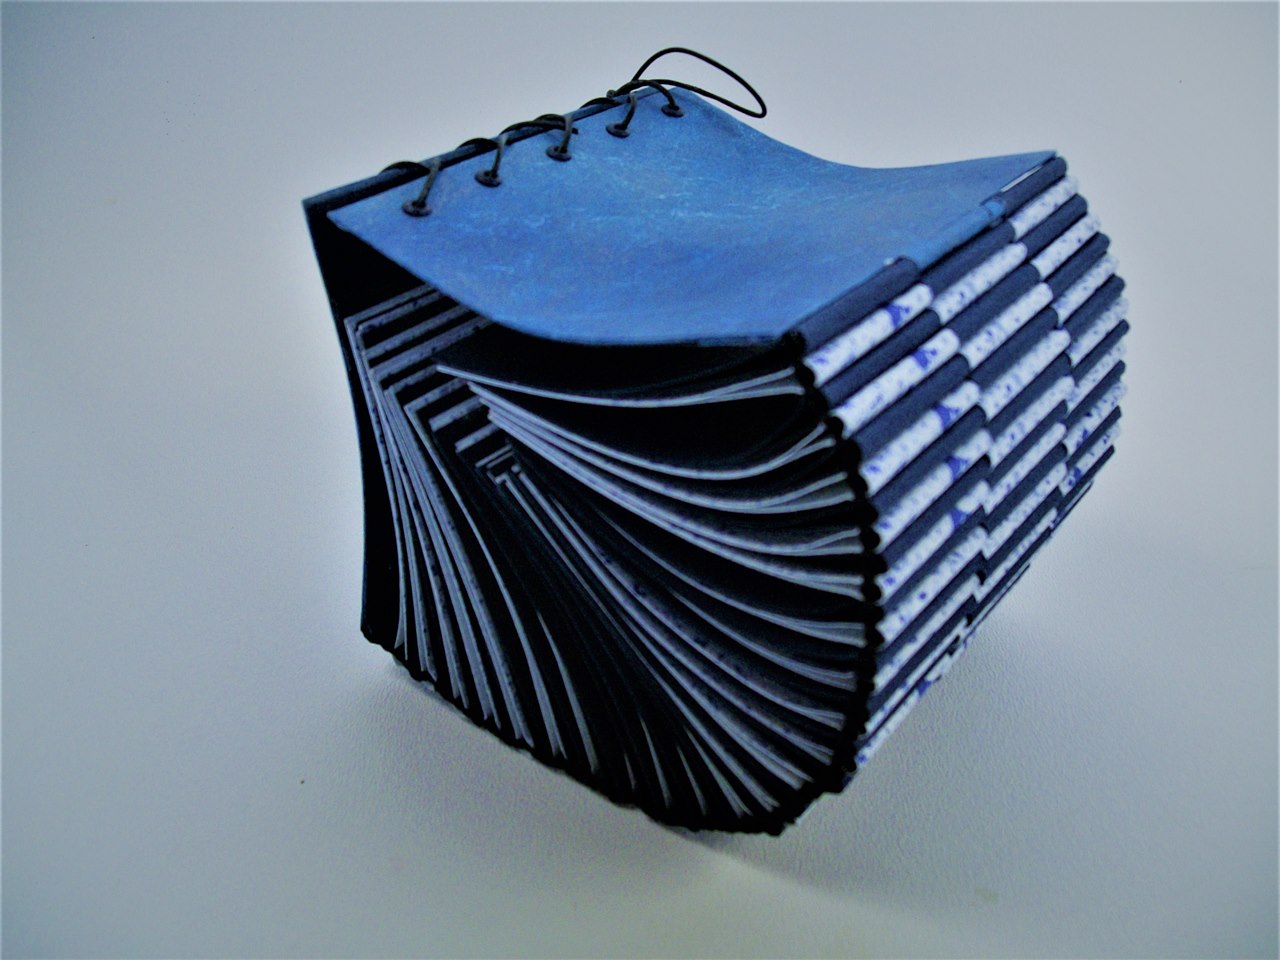 hinged book - from workshop (2)